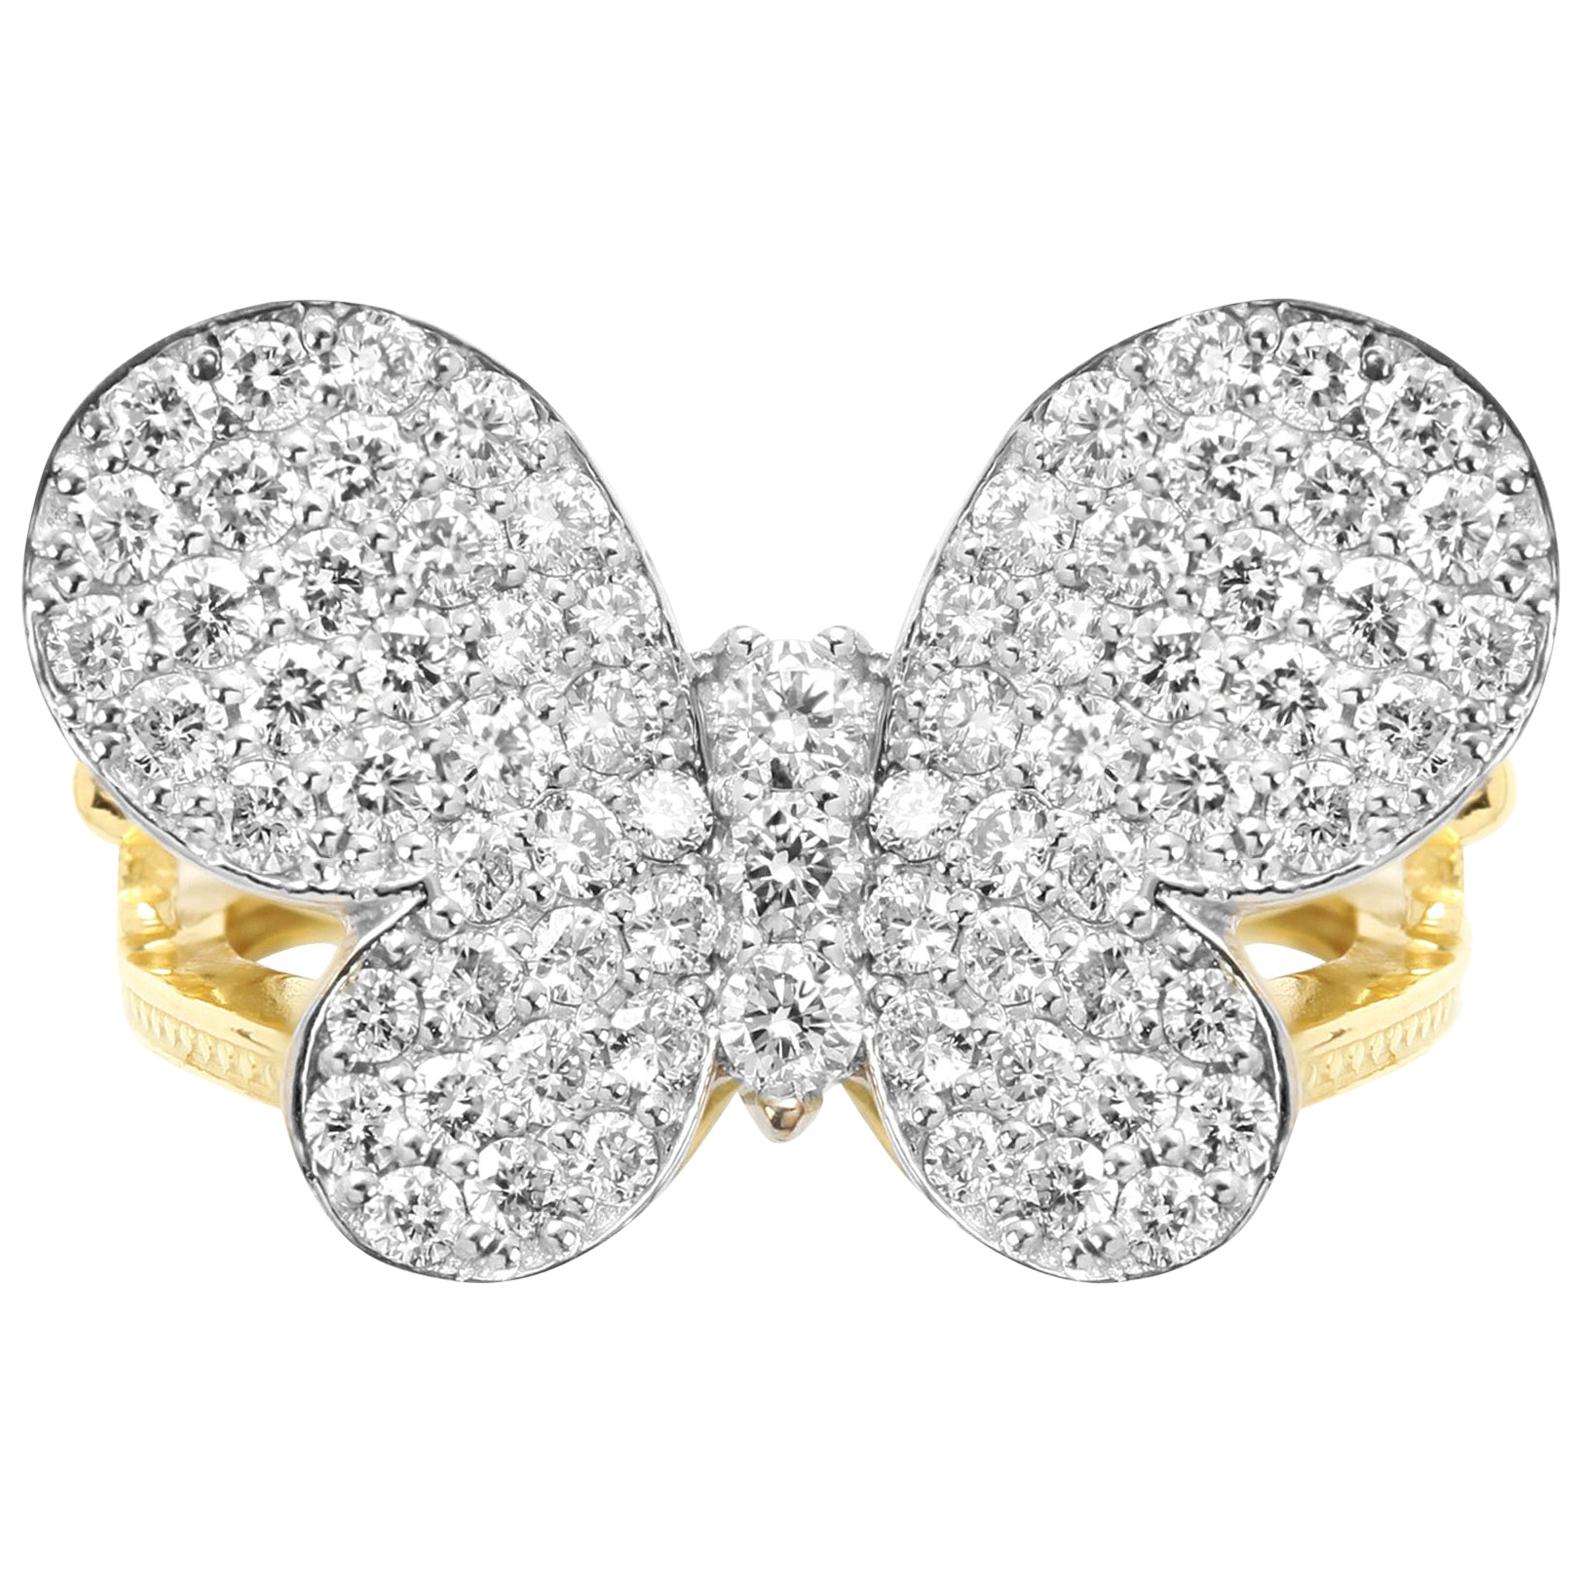 Stambolian 18 Karat Yellow and White Two-Tone Gold Diamond 3D Butterfly Ring